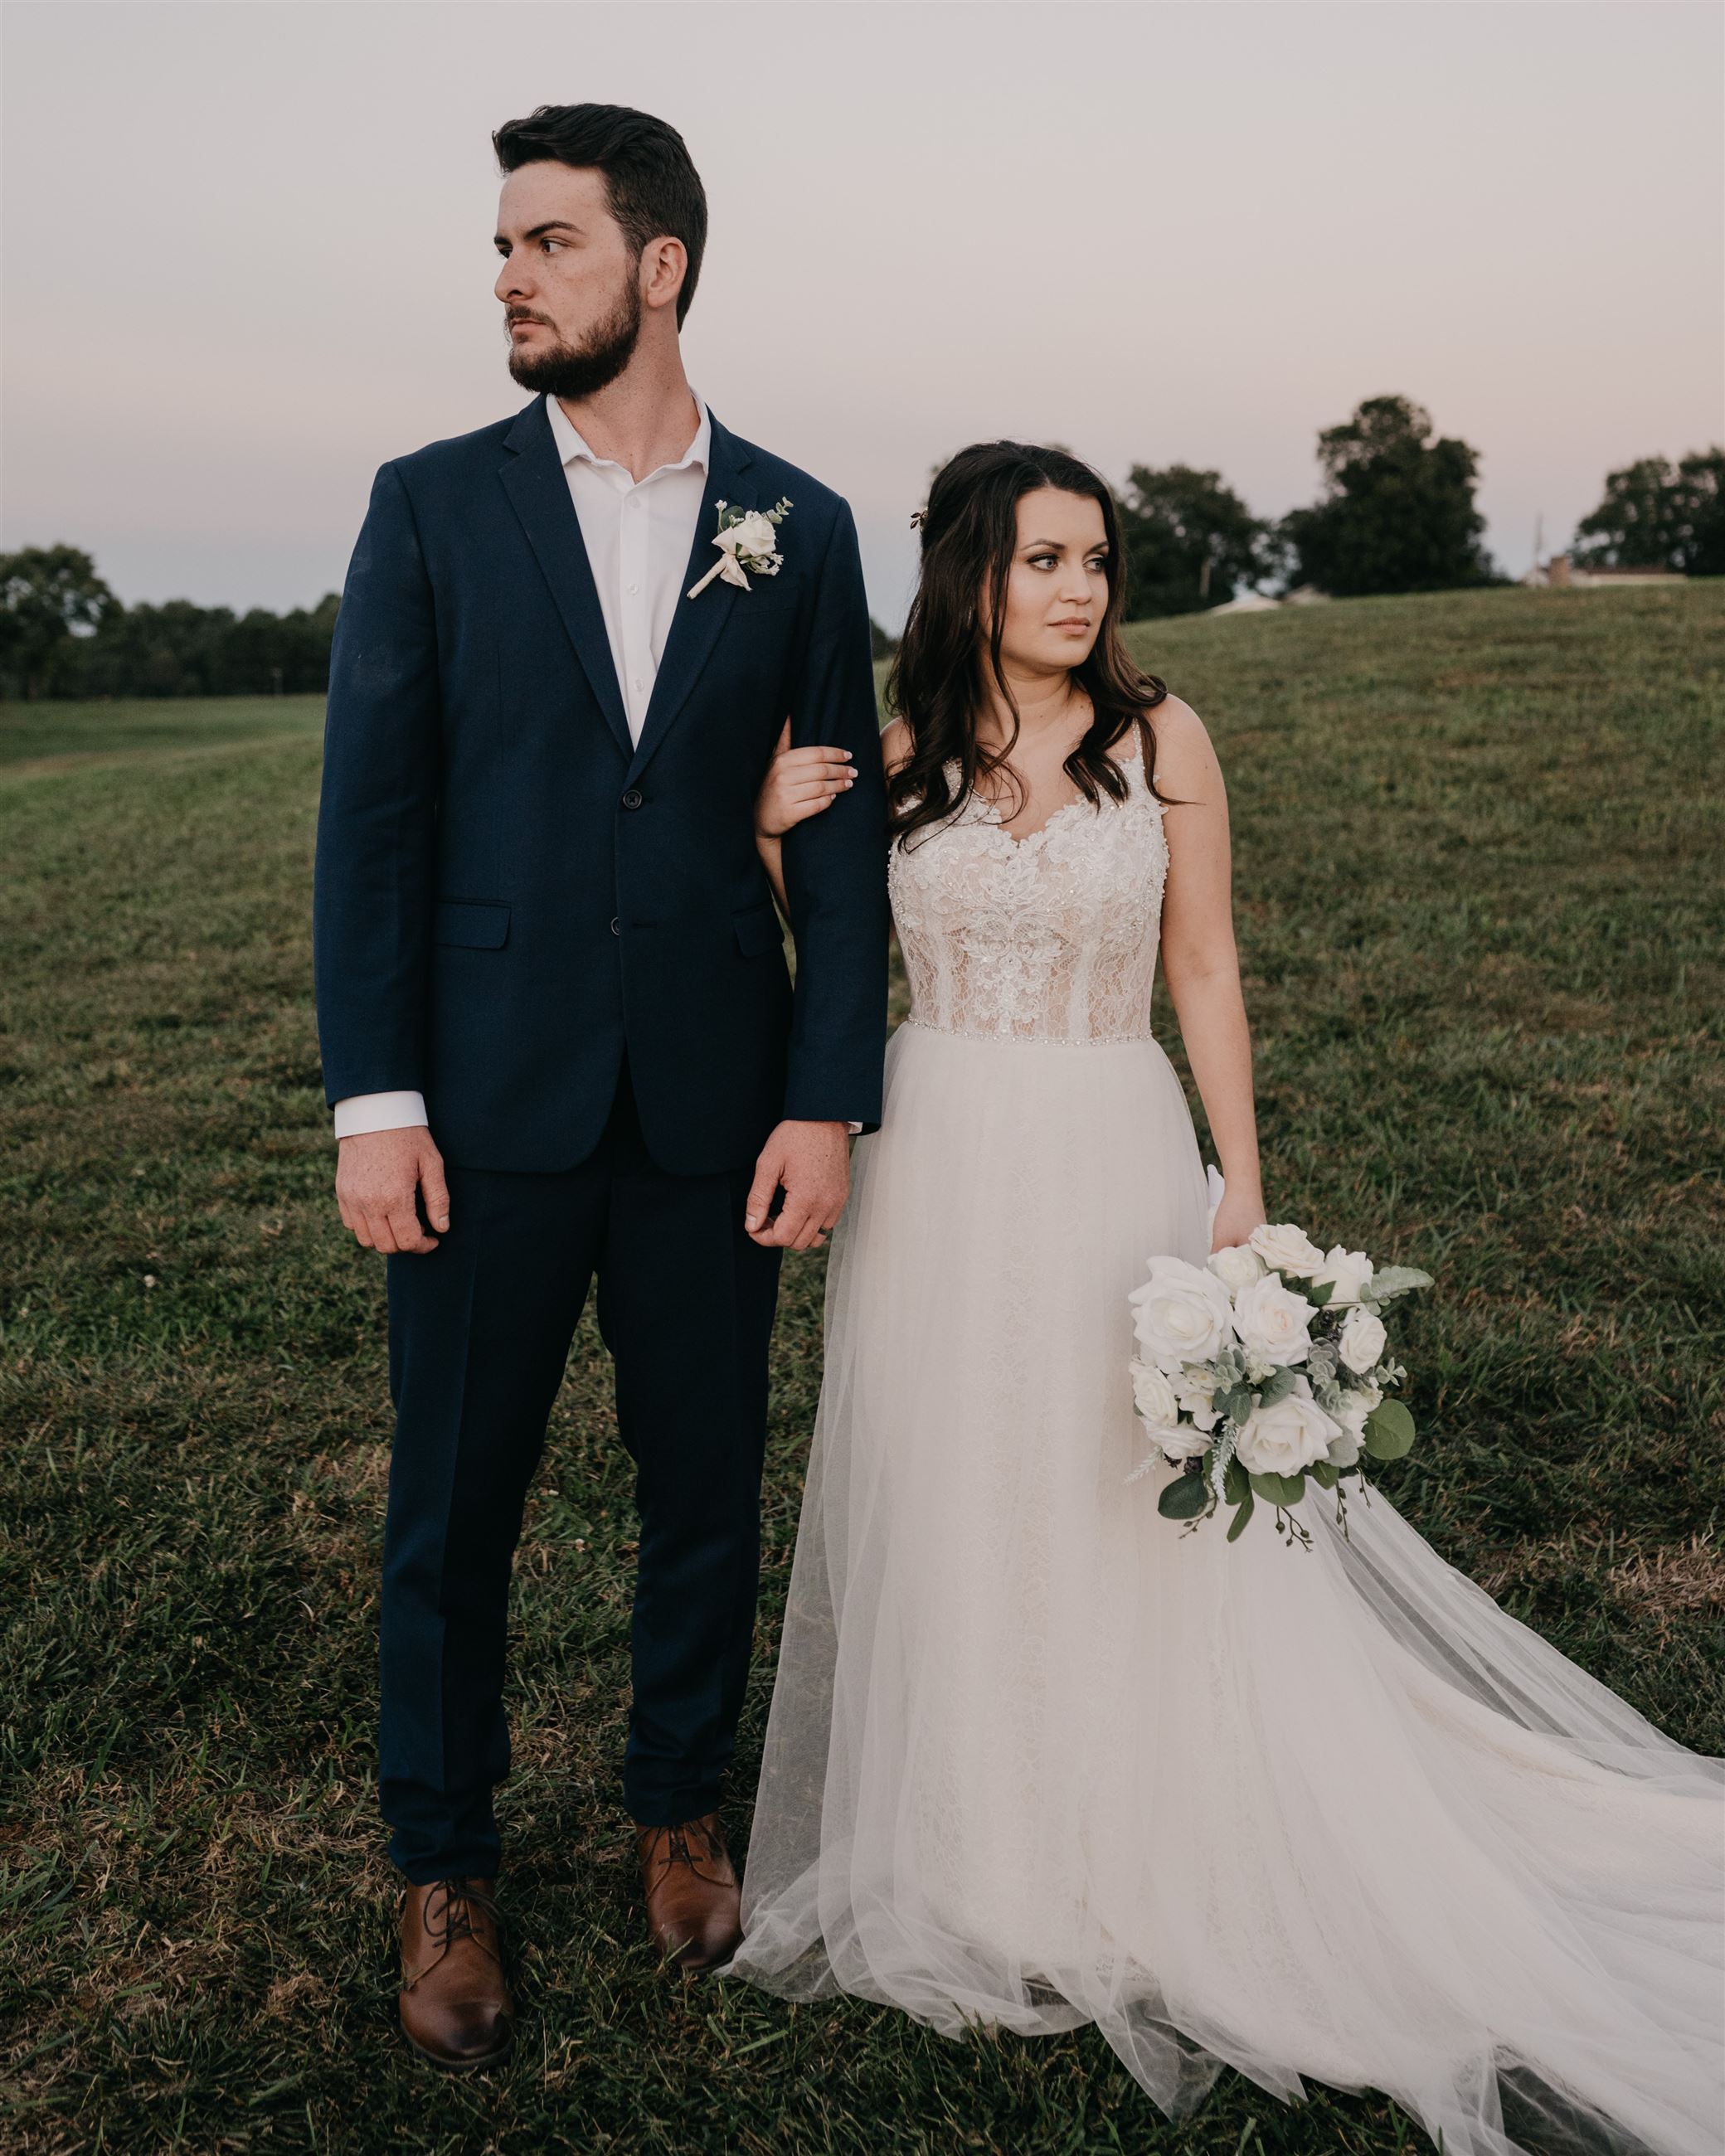 Bride and groom standing next to each other at wedding venue in South Carolina